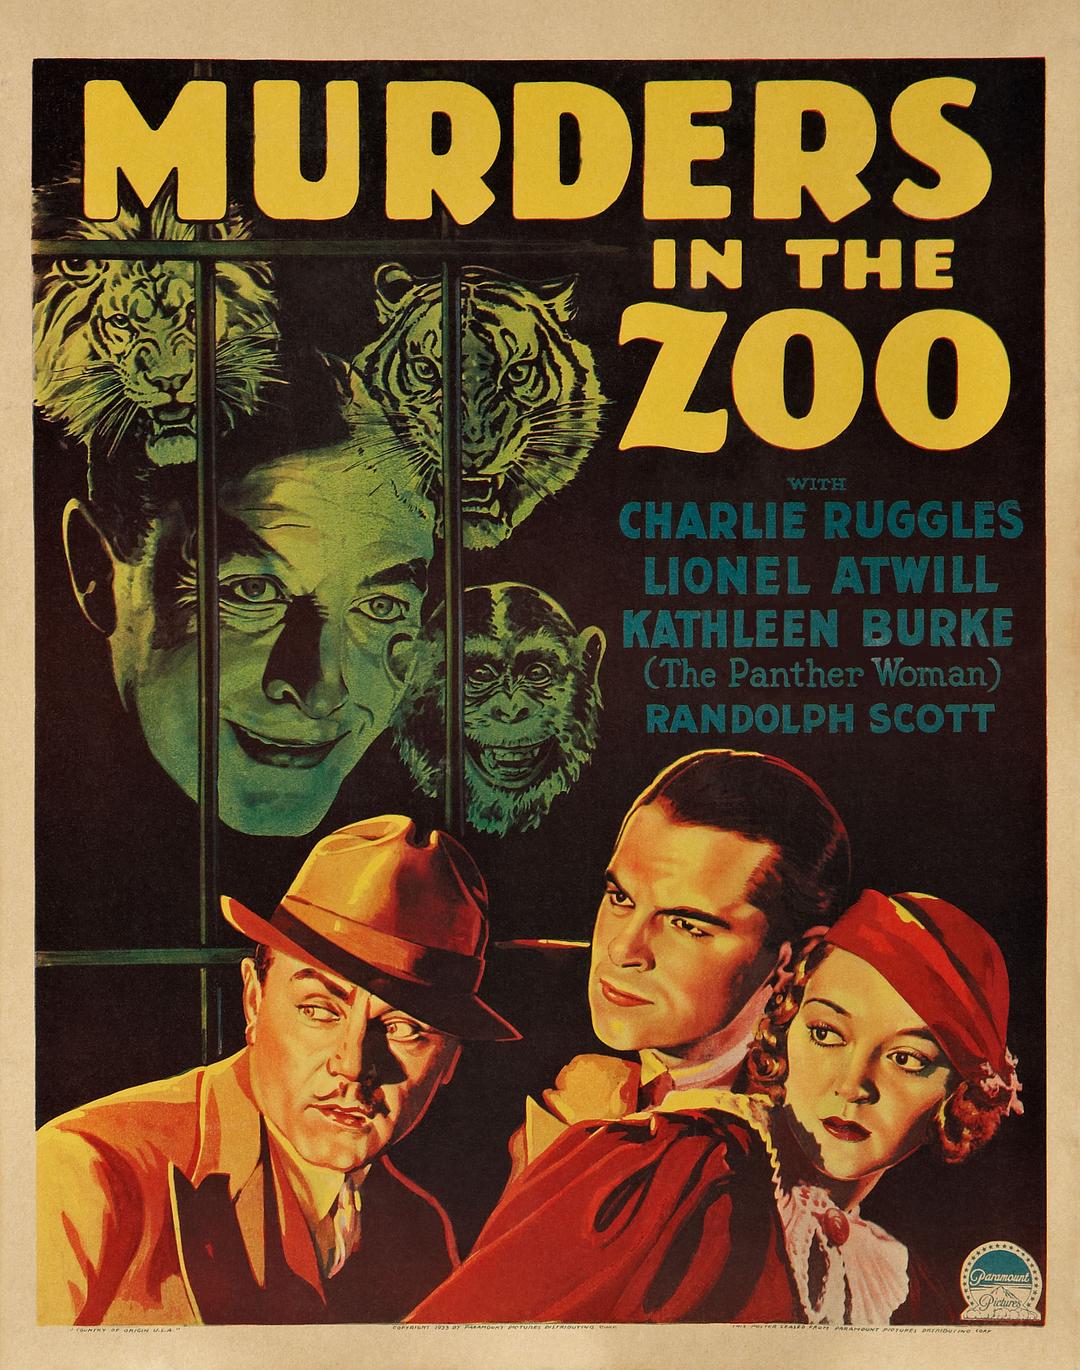 ԰ɱ Murders.in.the.Zoo.1933.1080p.BluRay.x264.DTS-FGT 5.66GB-1.png